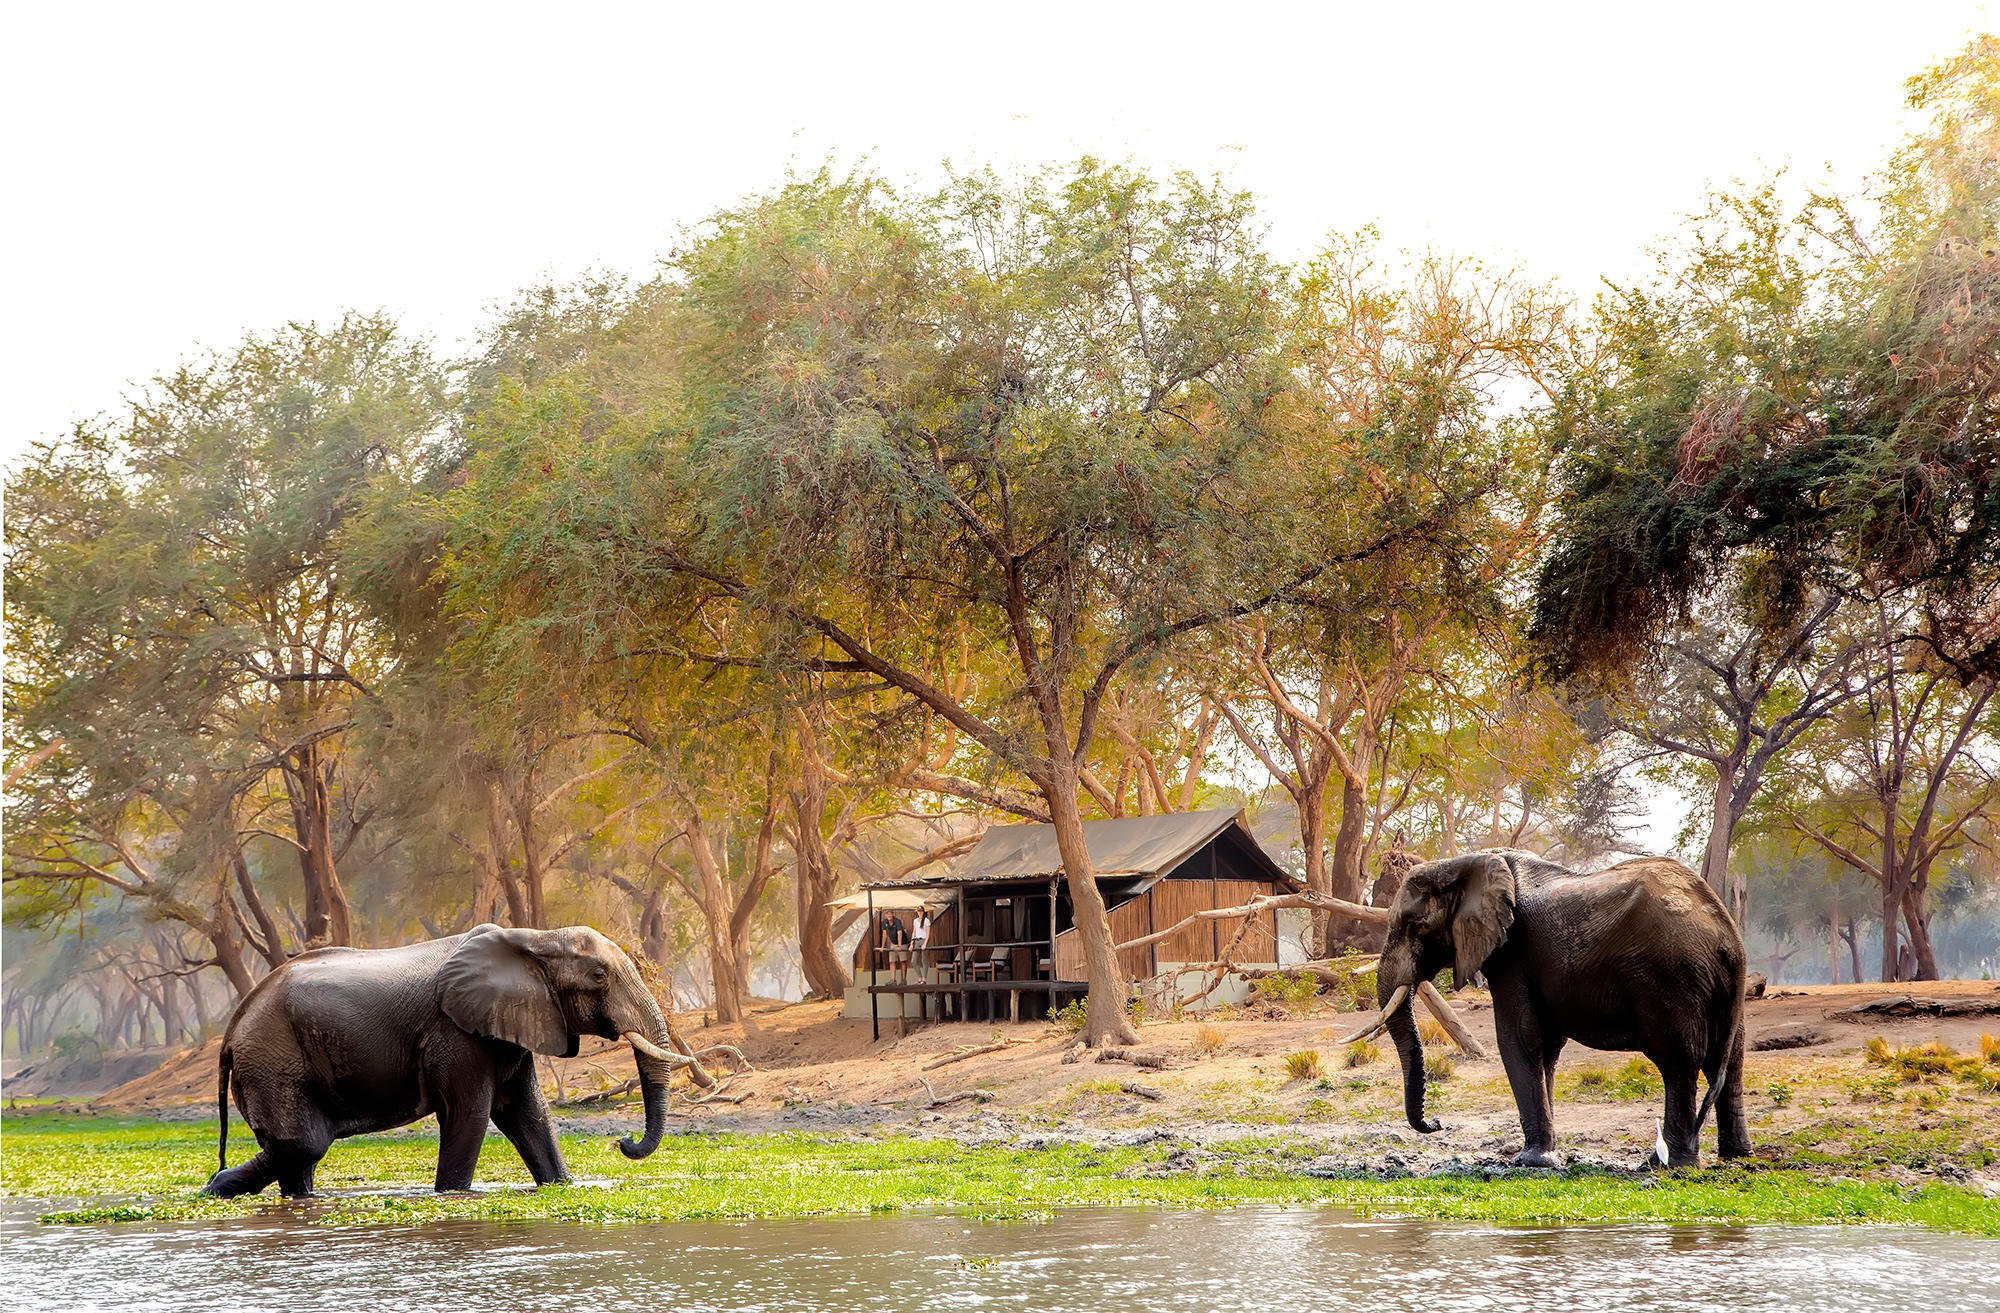 Old Mondoro tents with elephants as neighbours